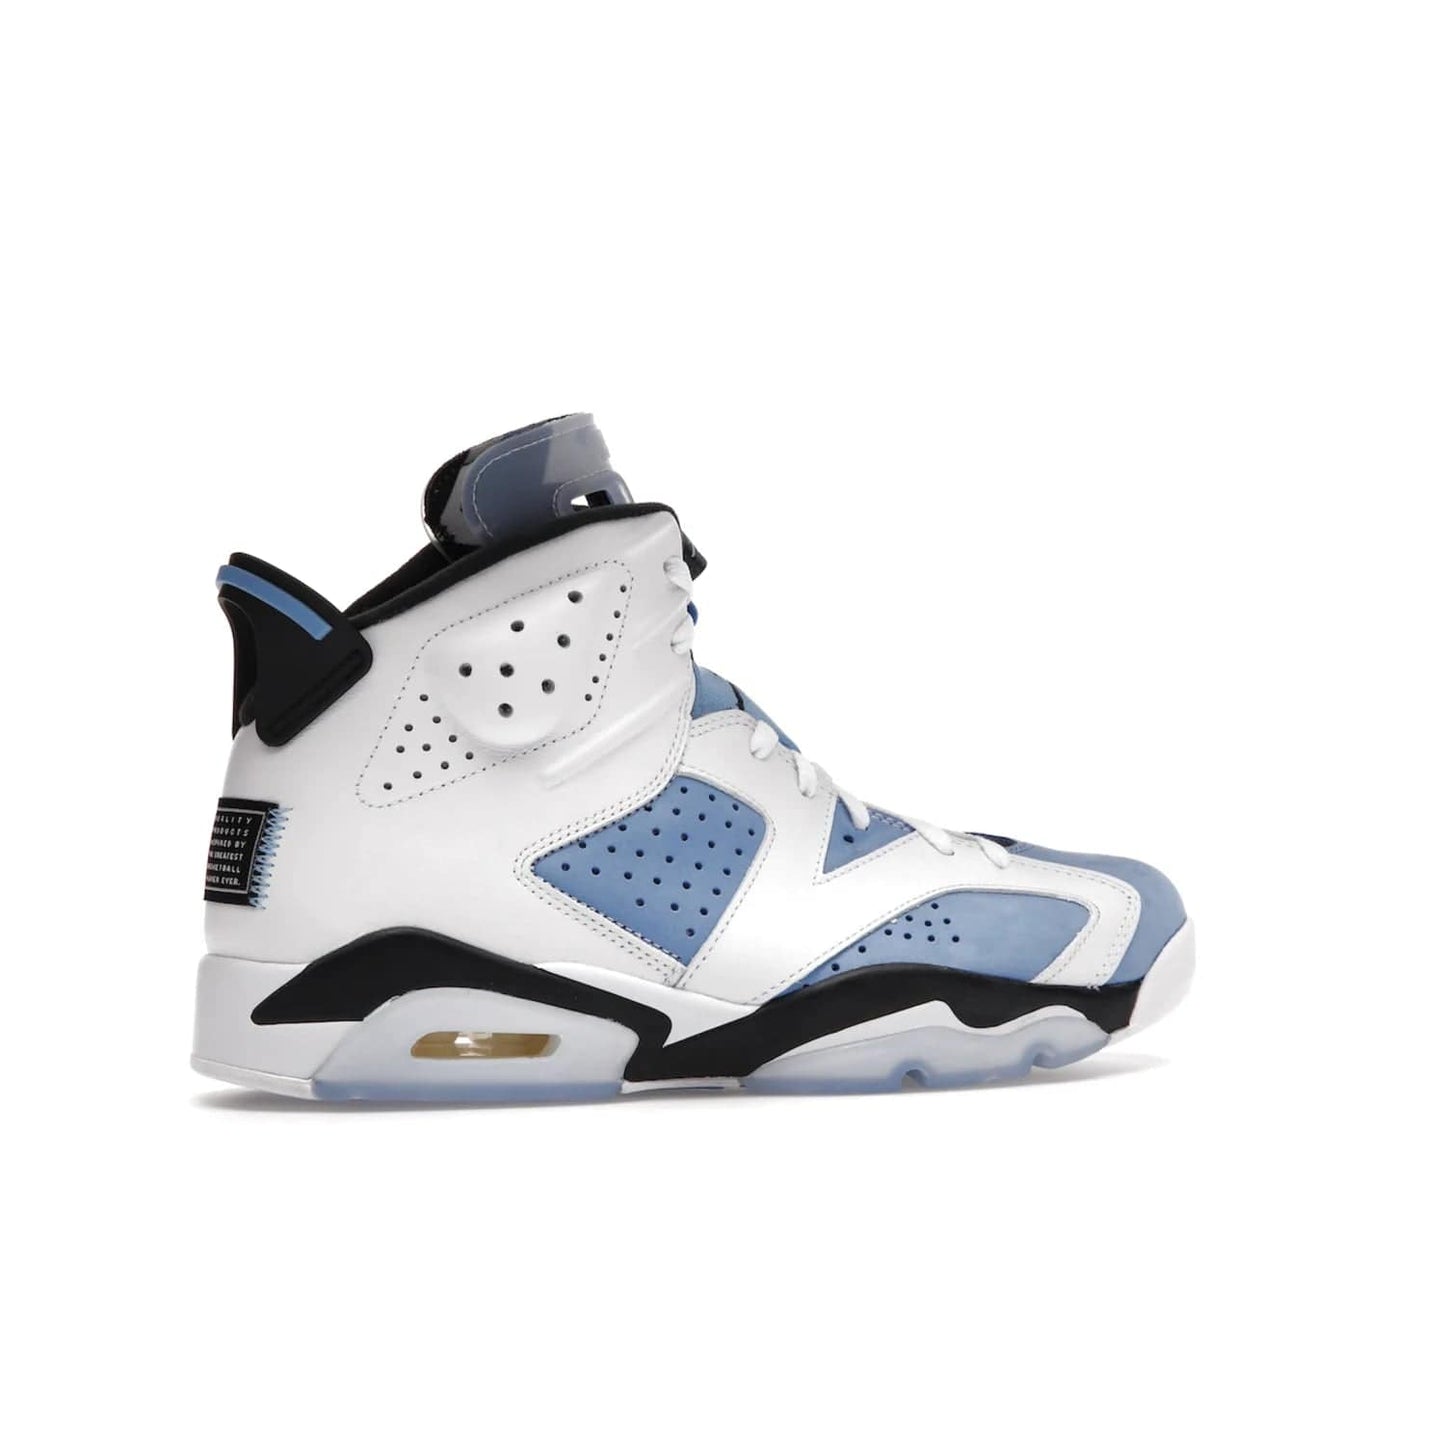 Jordan 6 Retro UNC White - Image 35 - Only at www.BallersClubKickz.com - Air Jordan 6 Retro UNC White with classic UNC colors brings nostalgia and style to a legendary silhouette. Celebrate MJ's alma mater with navy blue accents, icy semi-translucent sole and Jordan Team patch. Out March 2022 for the Sneaker Enthusiast.